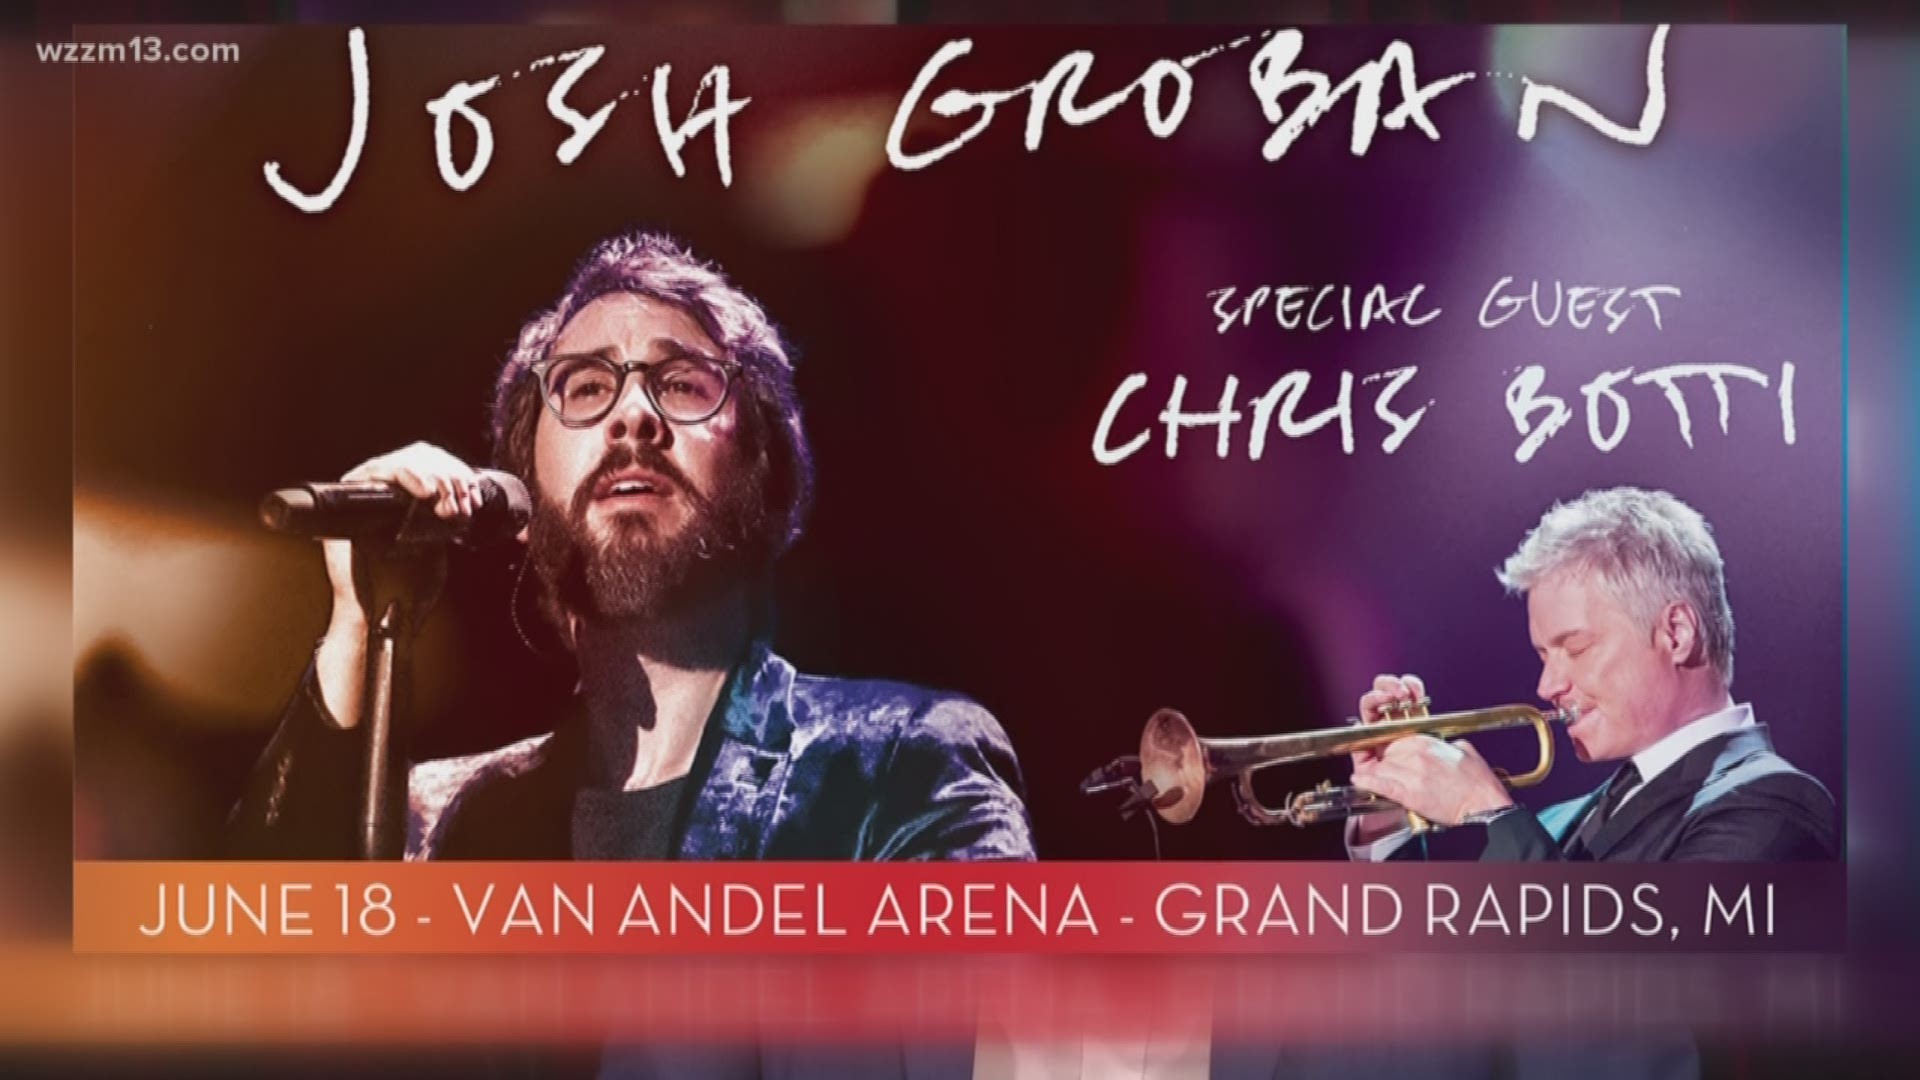 Multi-platinum award-winning singer, songwriter and global superstar Josh Groban is hitting the road for his Summer 2019 BRIDGES tour. He's headed our way on June 18 for a performance at Van Andel Arena.